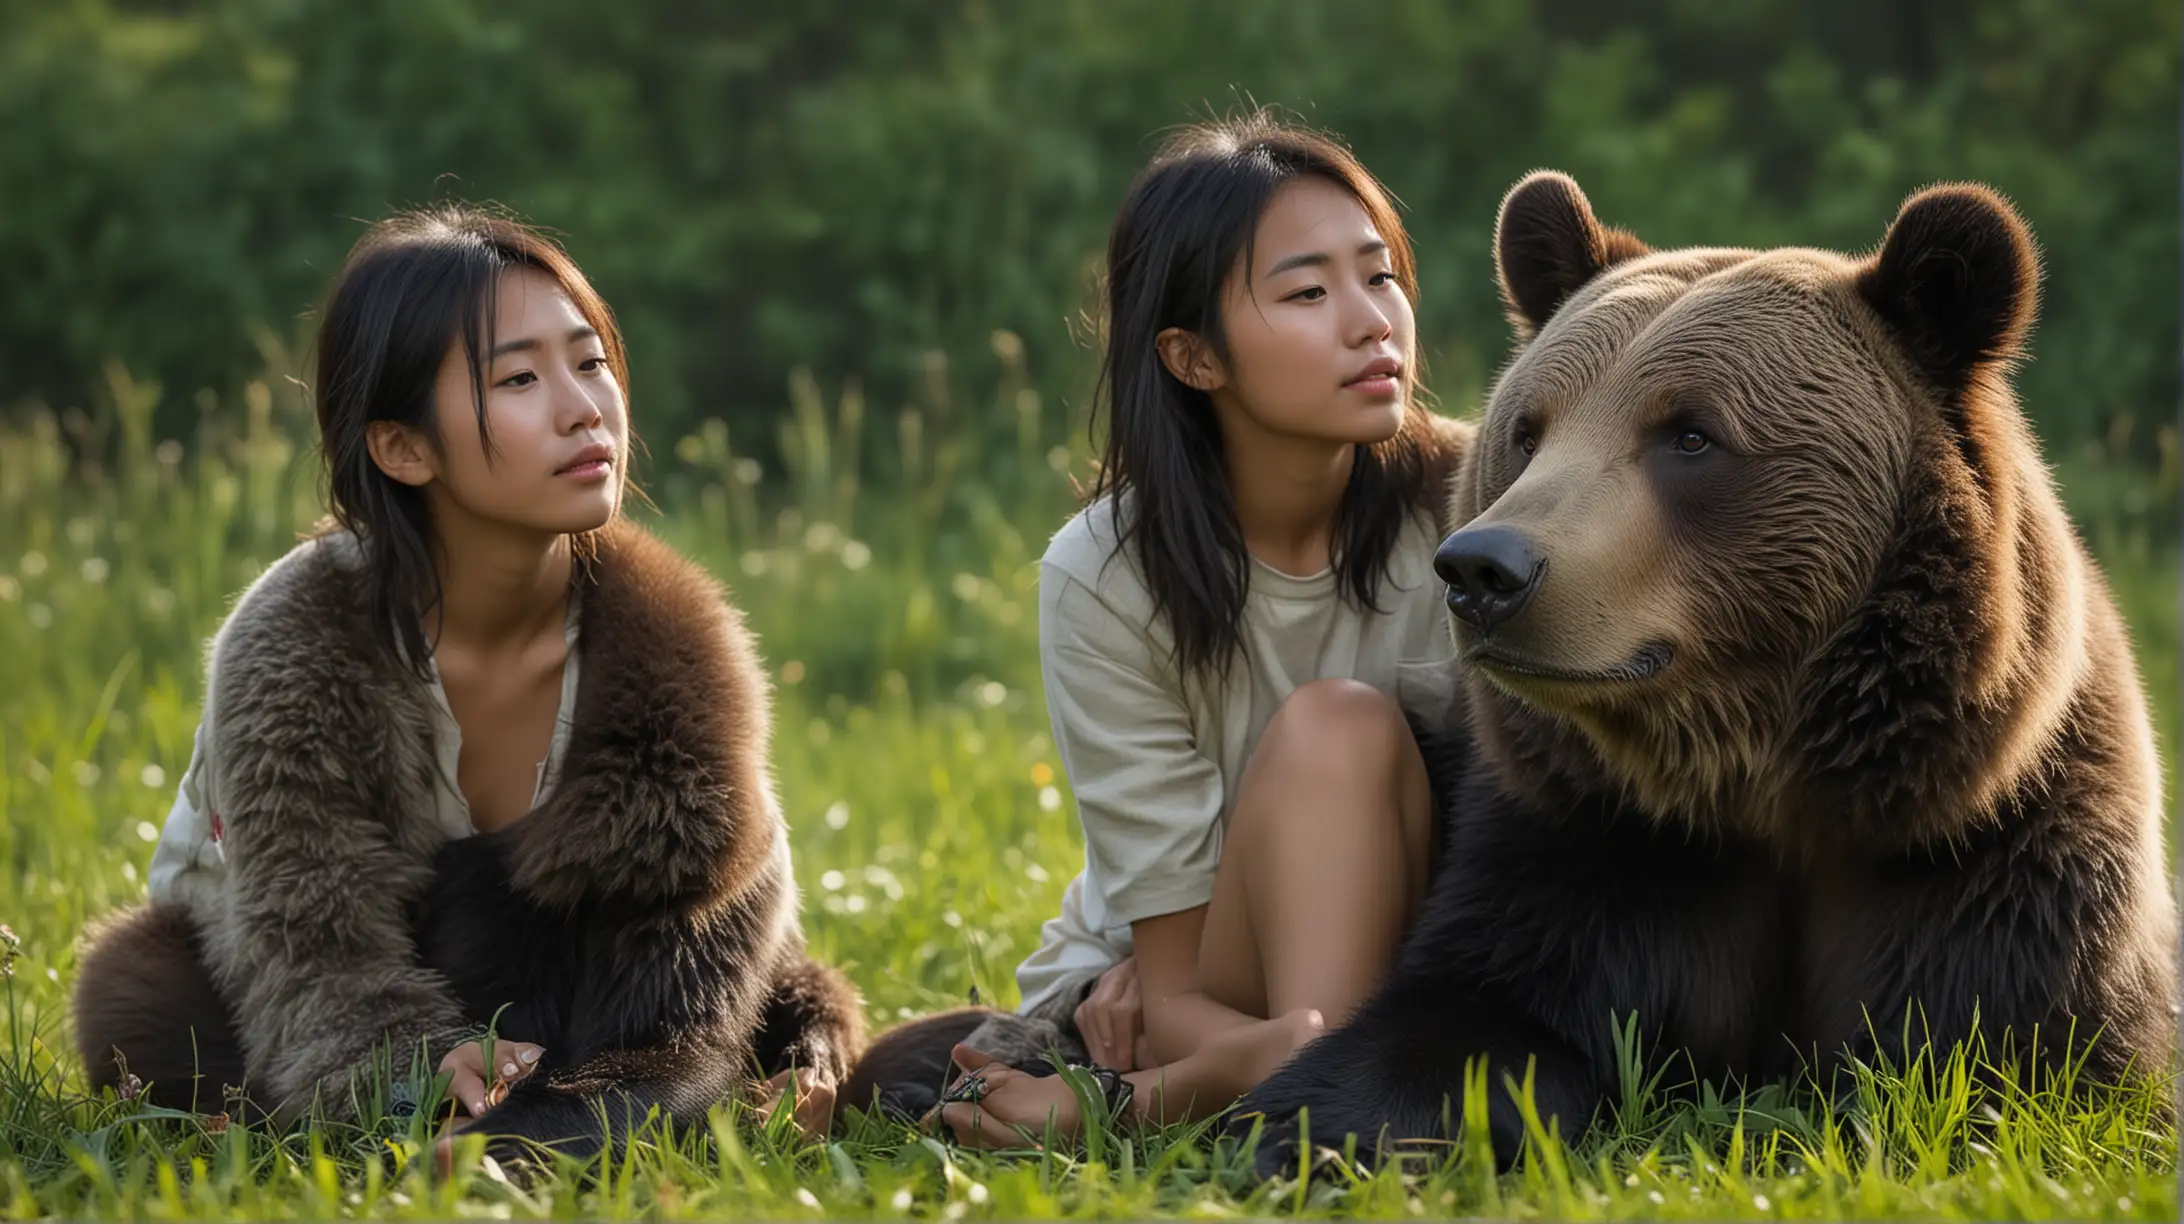 An ultra-realistic photograph captured with a canon 5d mark III camera, equipped with an 85mm lens at F 1.8 aperture setting, Wildlife Photography, Close-up of [ a Chinese  girl and a bear sitting on the grass], ground level angle to highlight their pure and gentle nature, National Geographic photography.